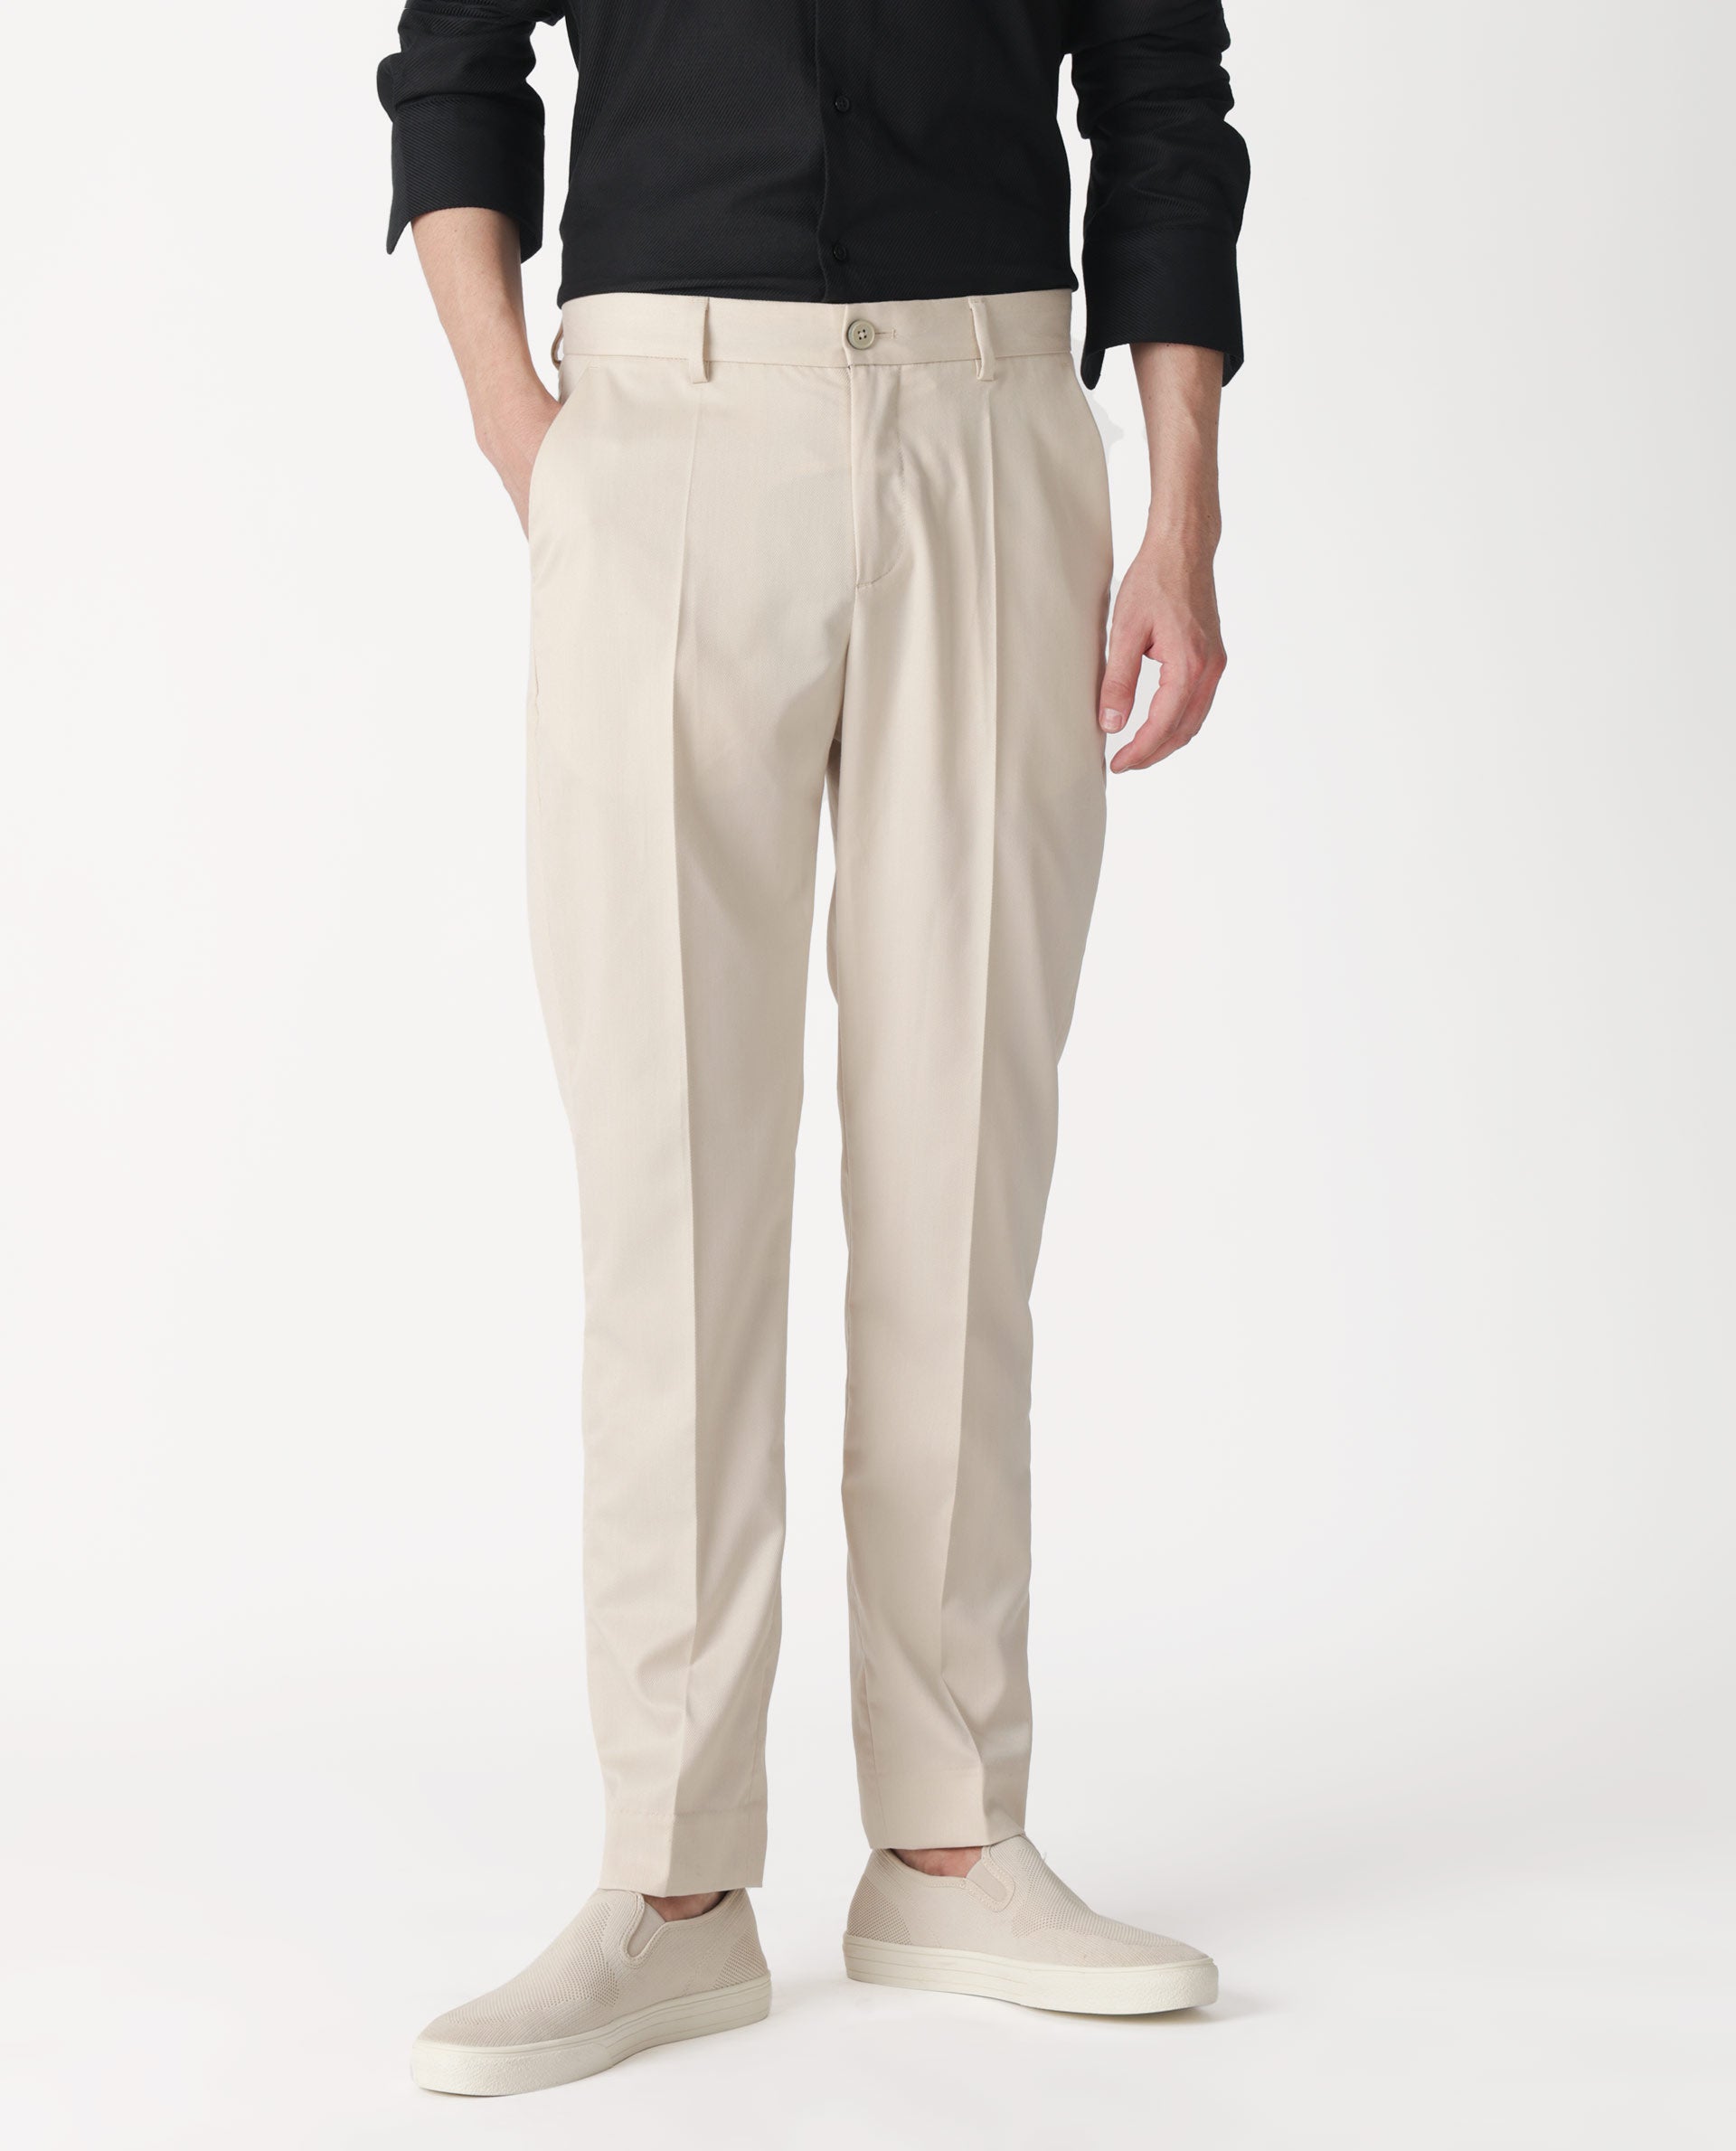 White Pleated Trousers - Kunal Anil Tanna